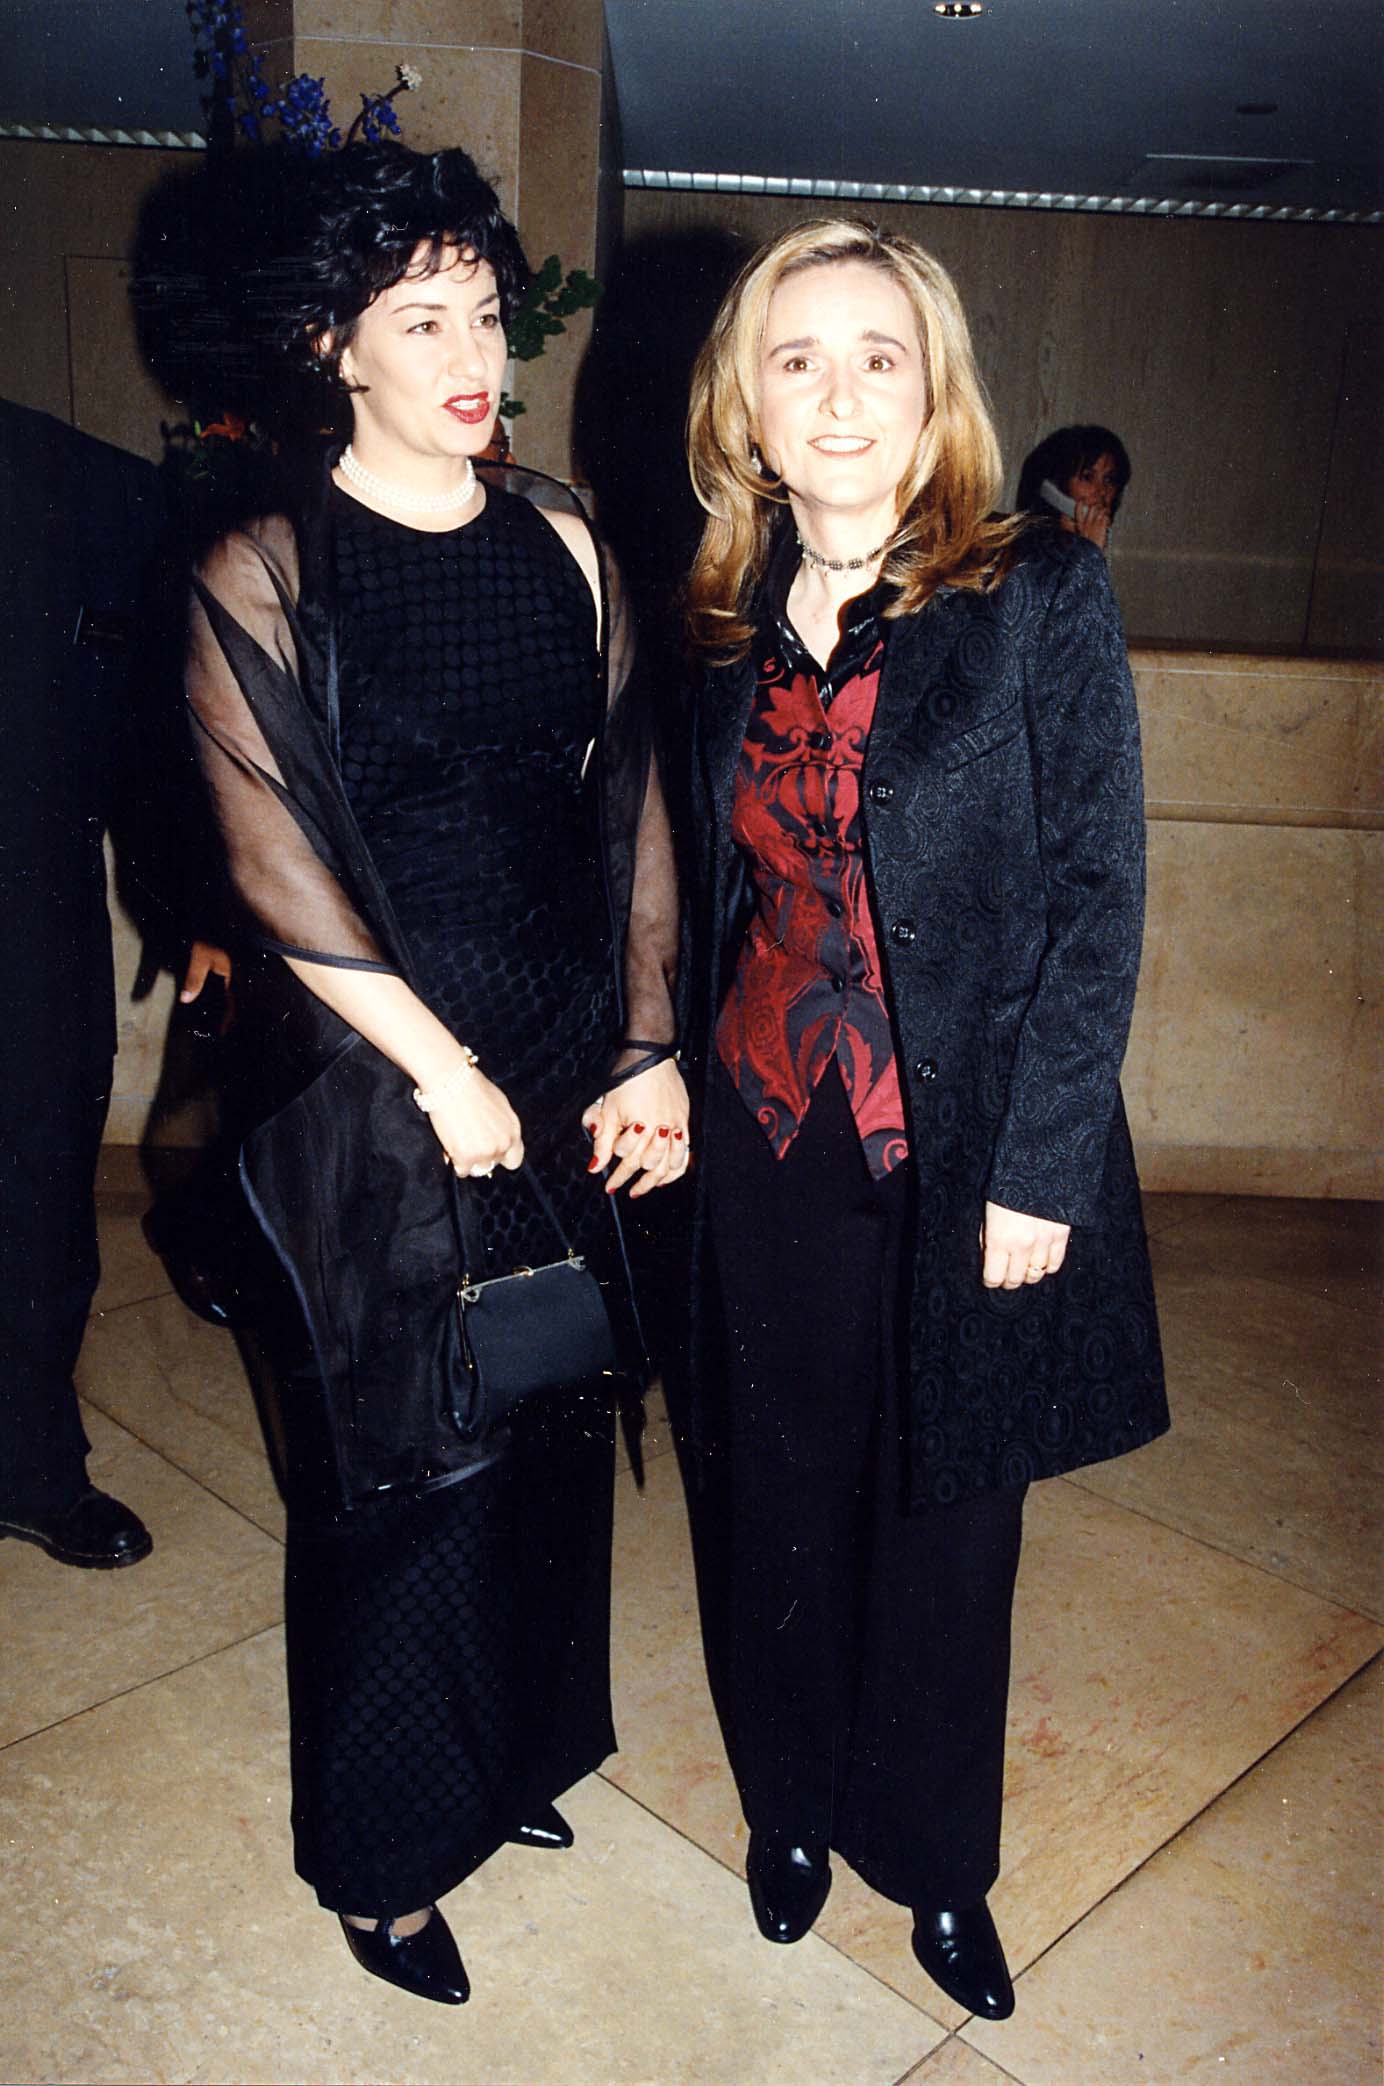 Melissa Etheridge and Julie Cypher at the 1998 John Huston Awards on September 10, 1998, in California. | Source: Getty Images